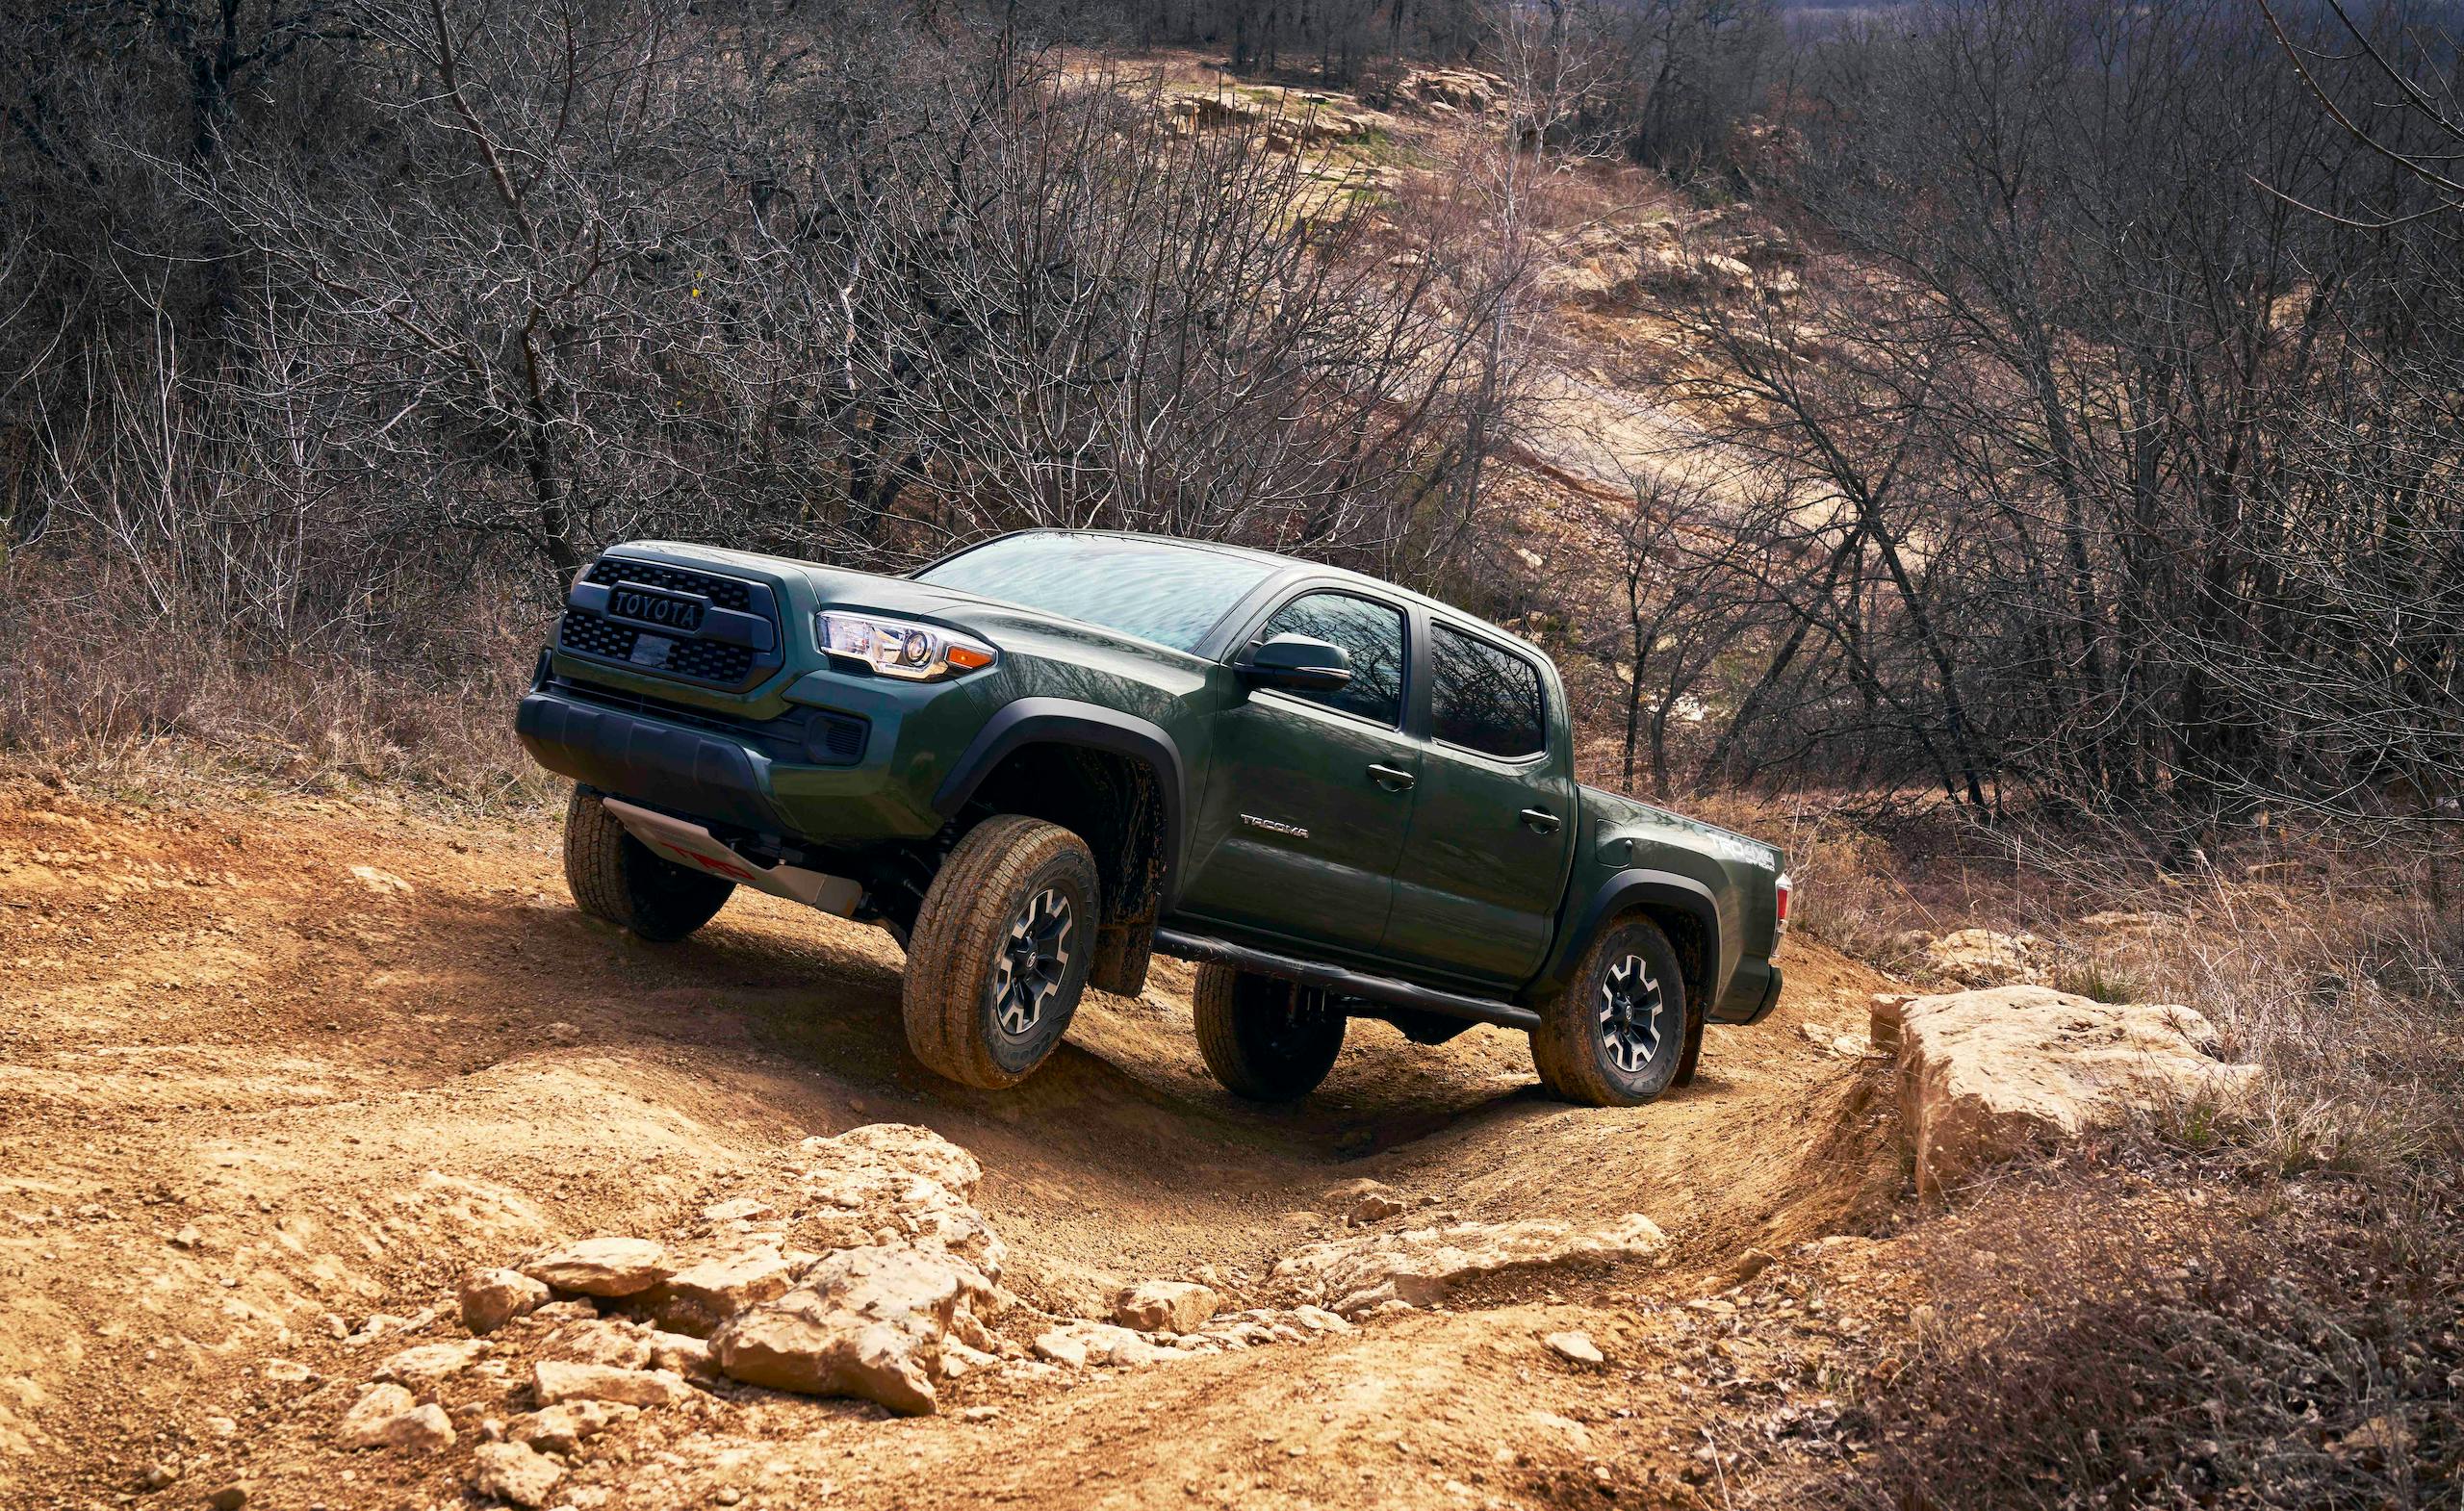 Toyota Racing Development releases lift kit for 2021 Tacoma—for